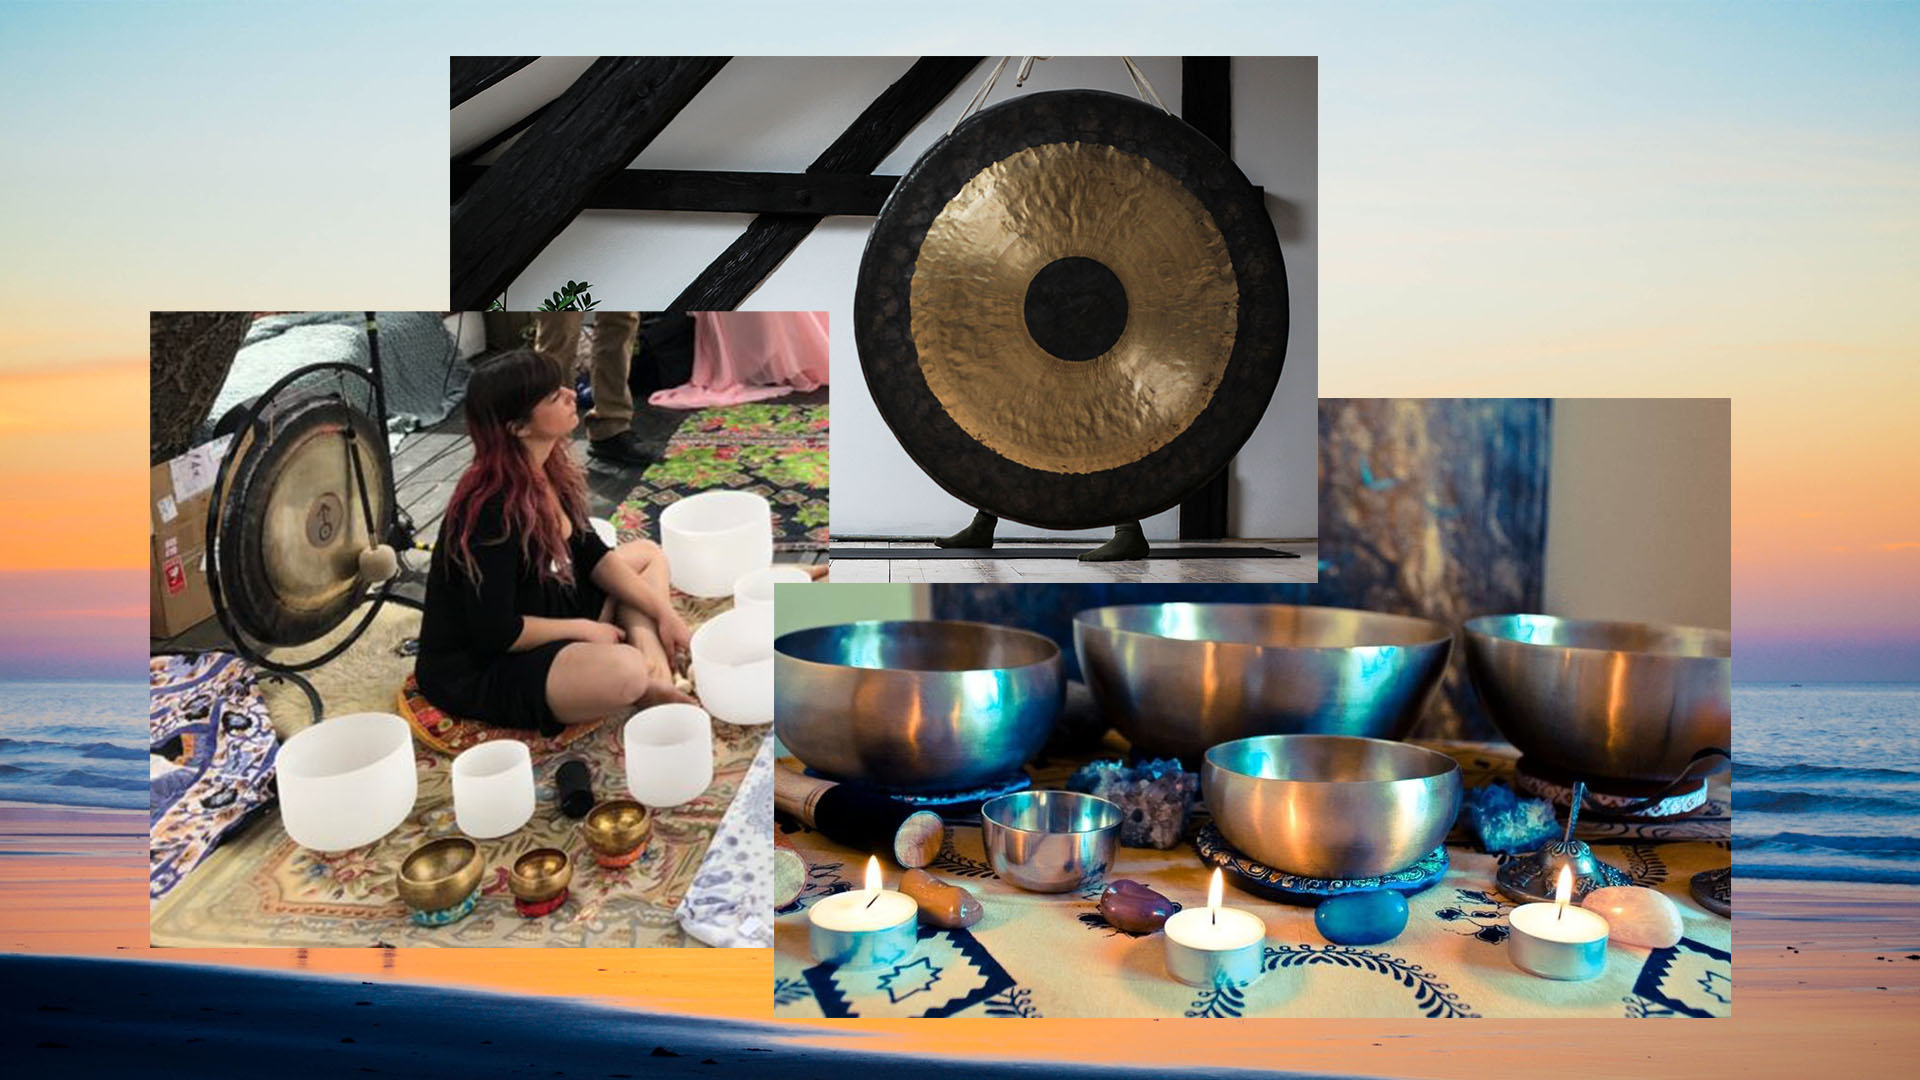 Sound hEaling Instruments for relaxation